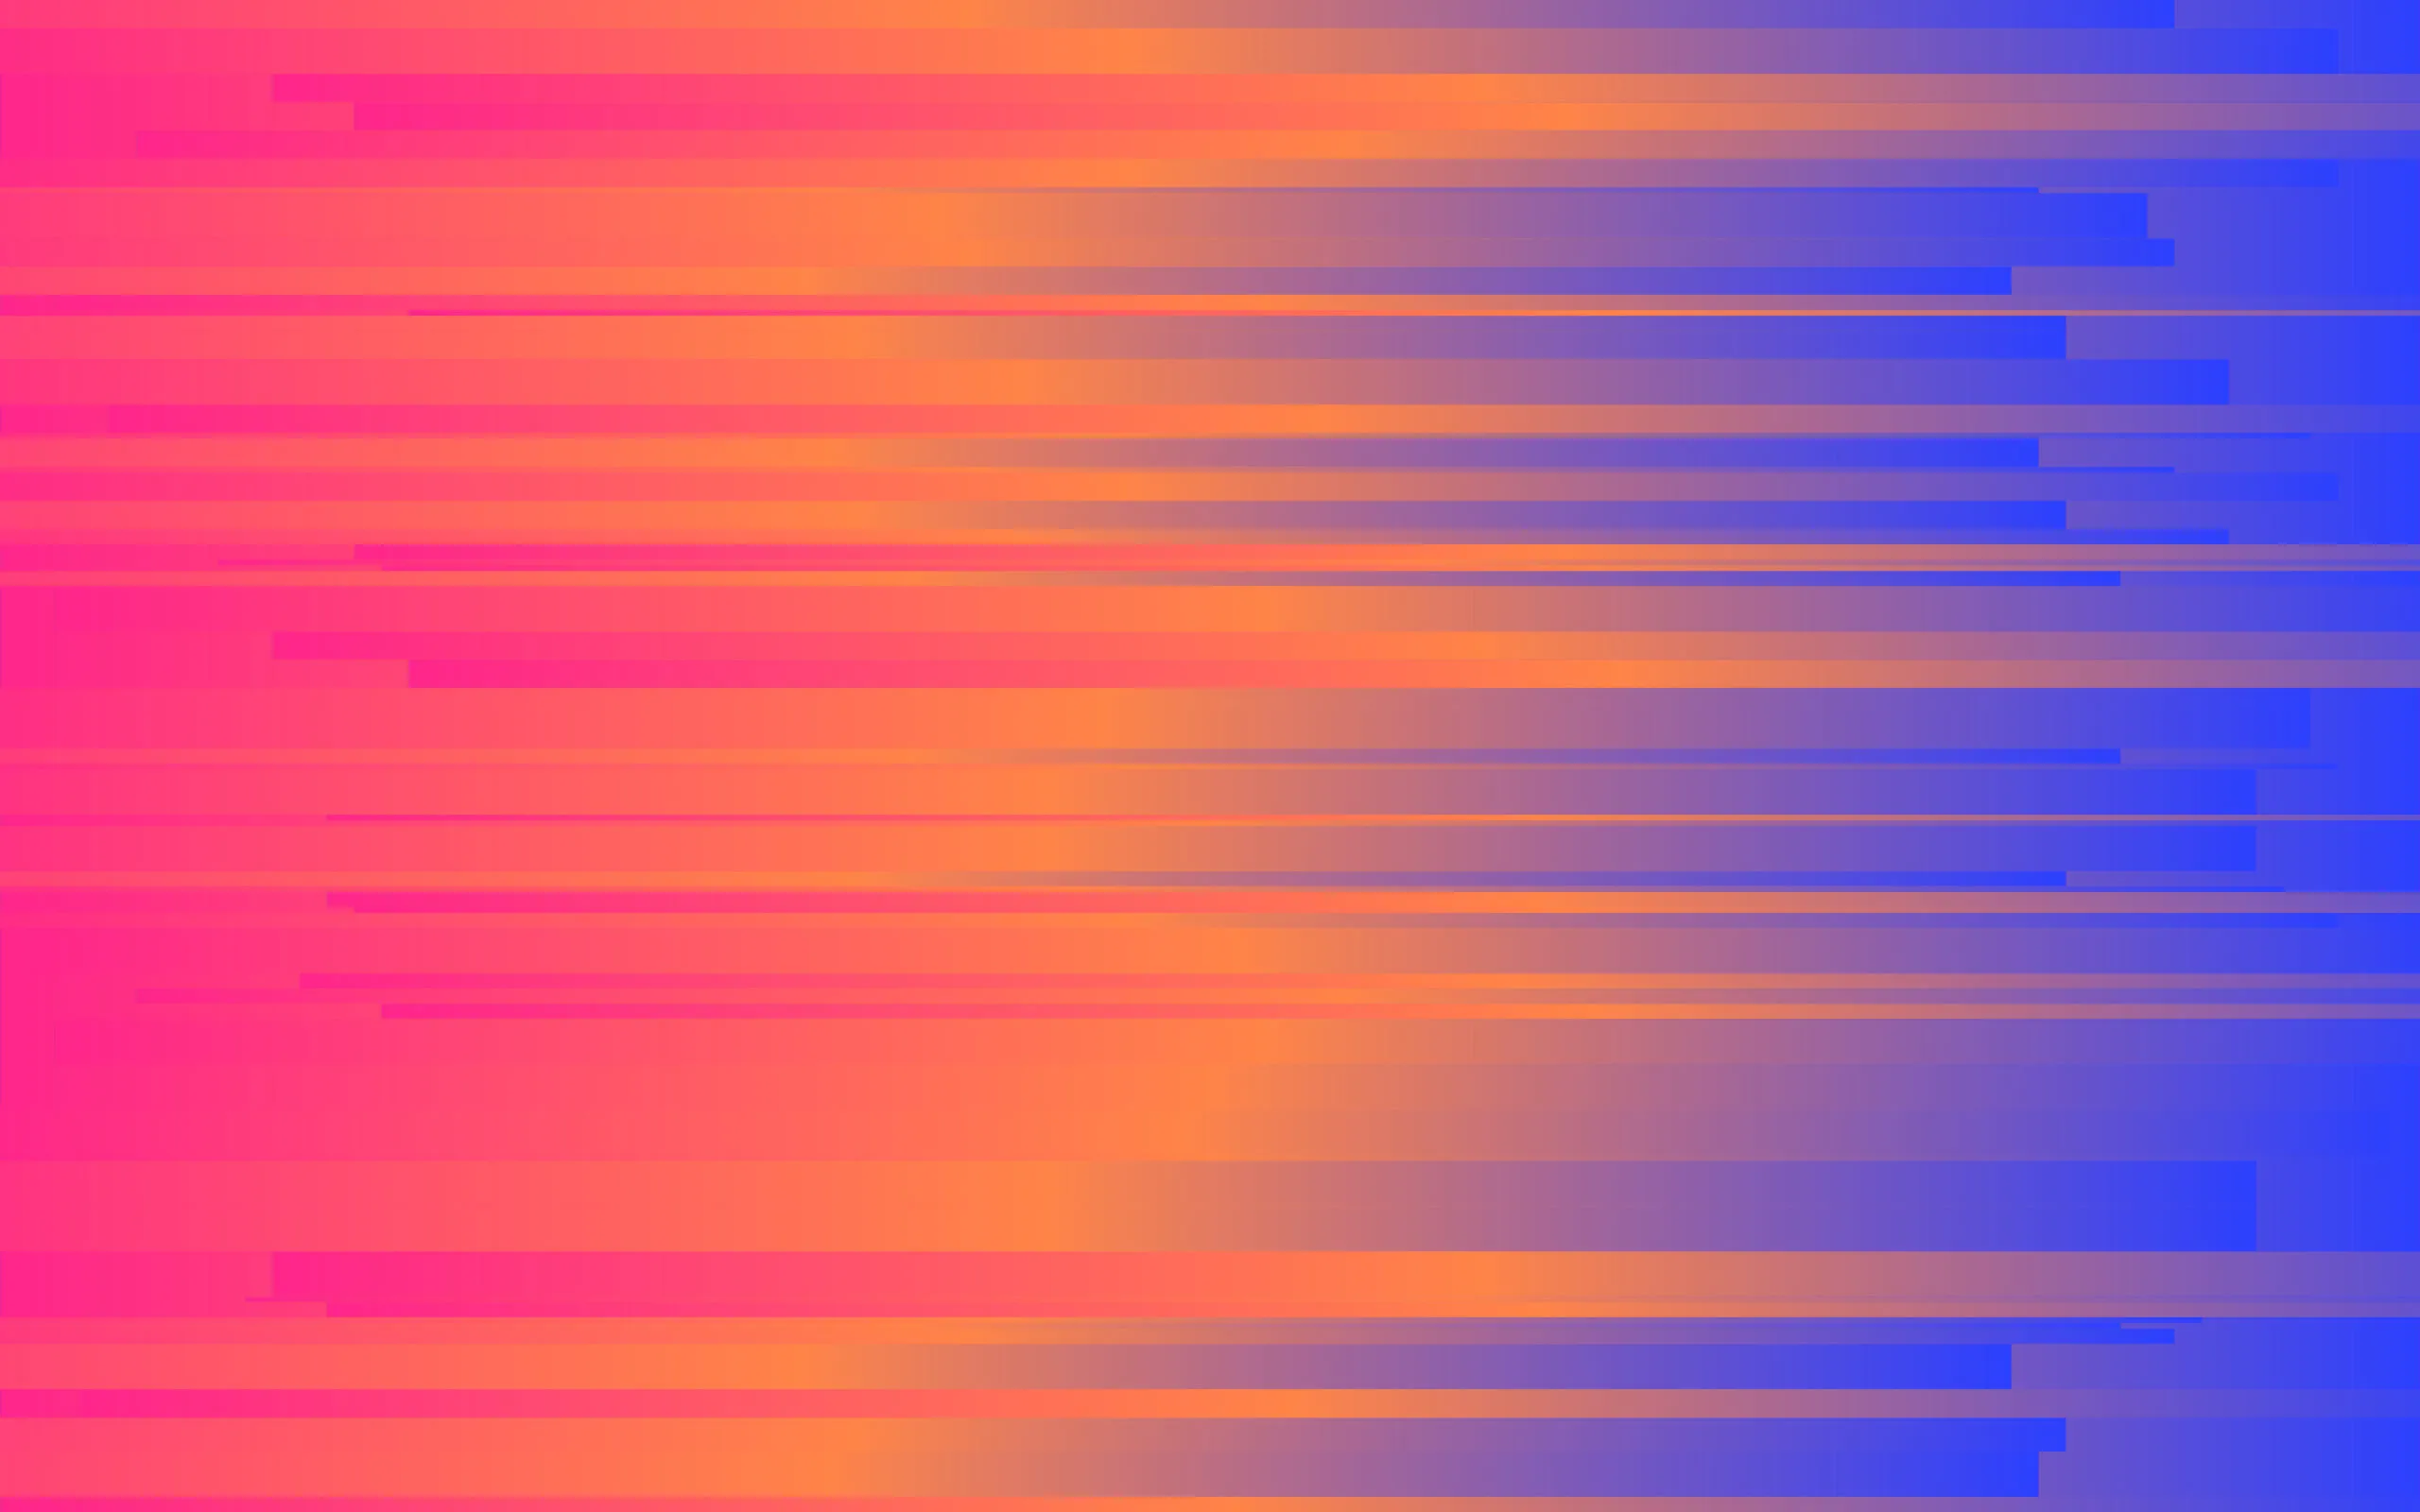 Randomly Generated Image of Geometric Shapes and Colors